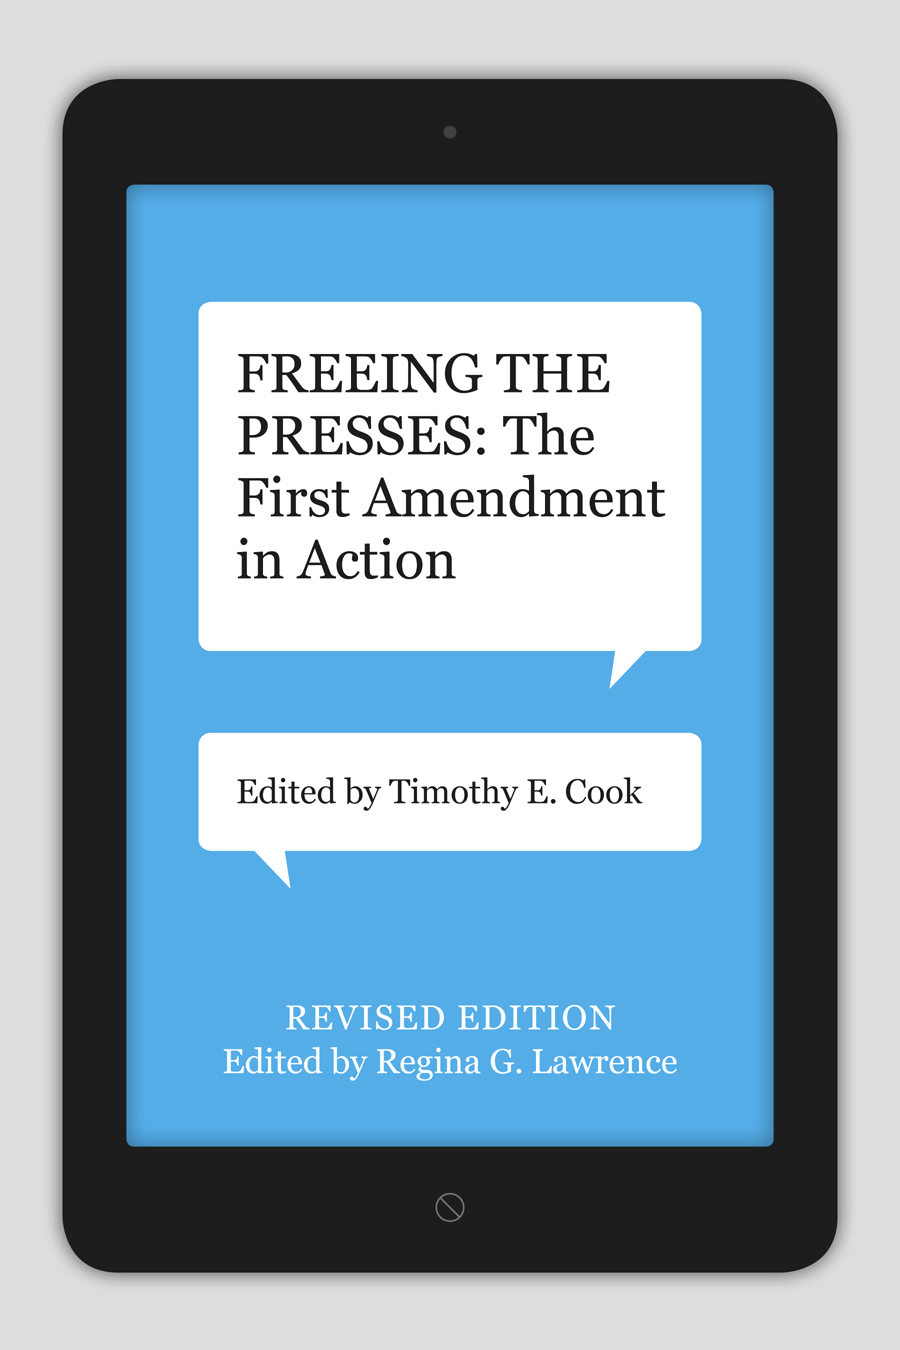 "Freeing the Presses" book cover